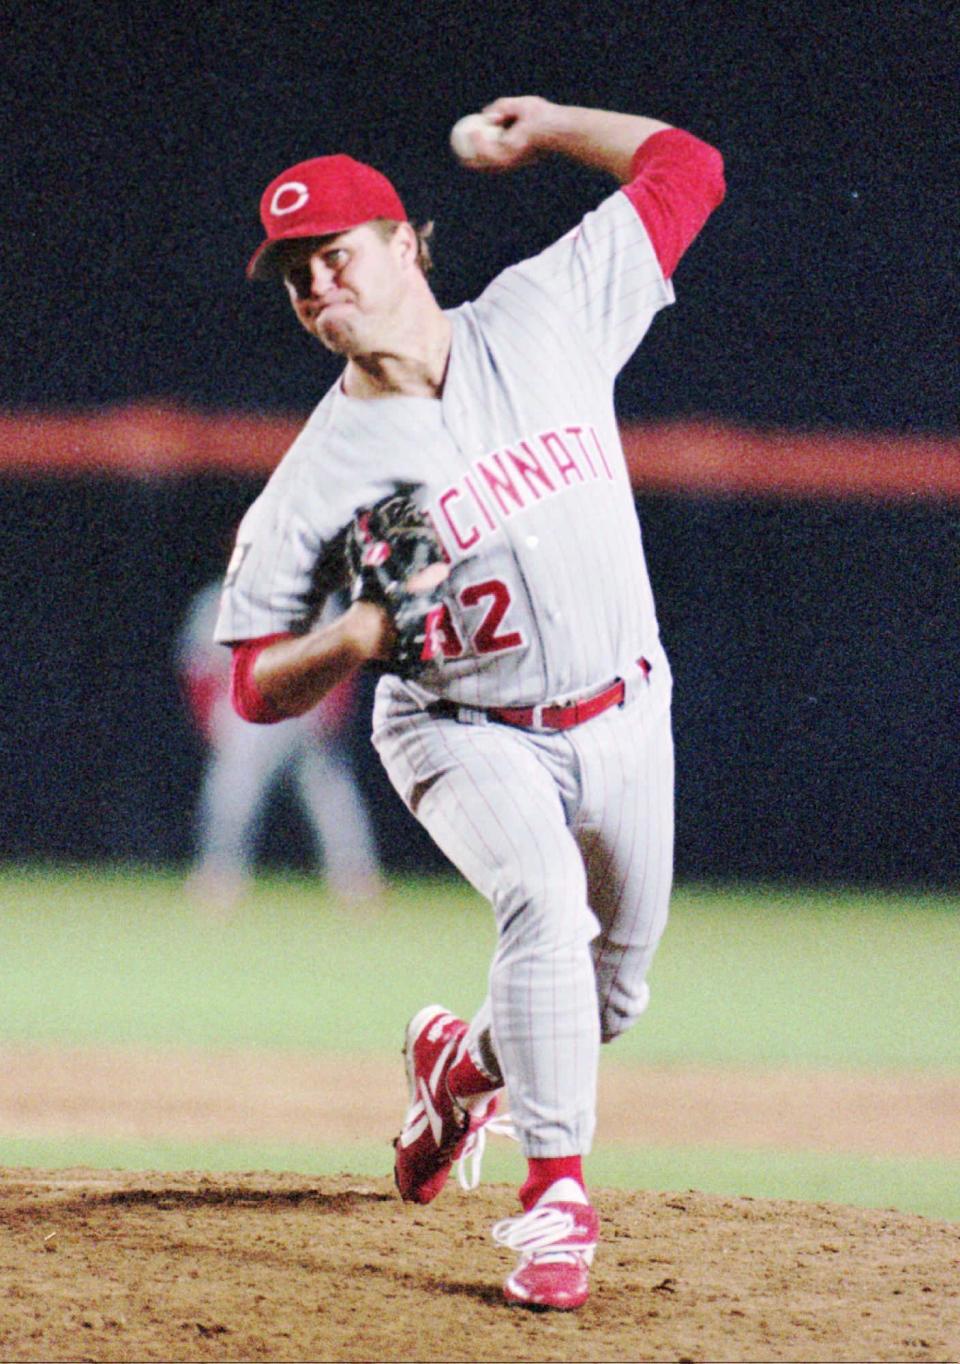 Reds pitcher Tom Browning delivers a pitch in the fifth inning of the Reds' 3-2 victory over the Padres on May 9, 1994 in San Diego.